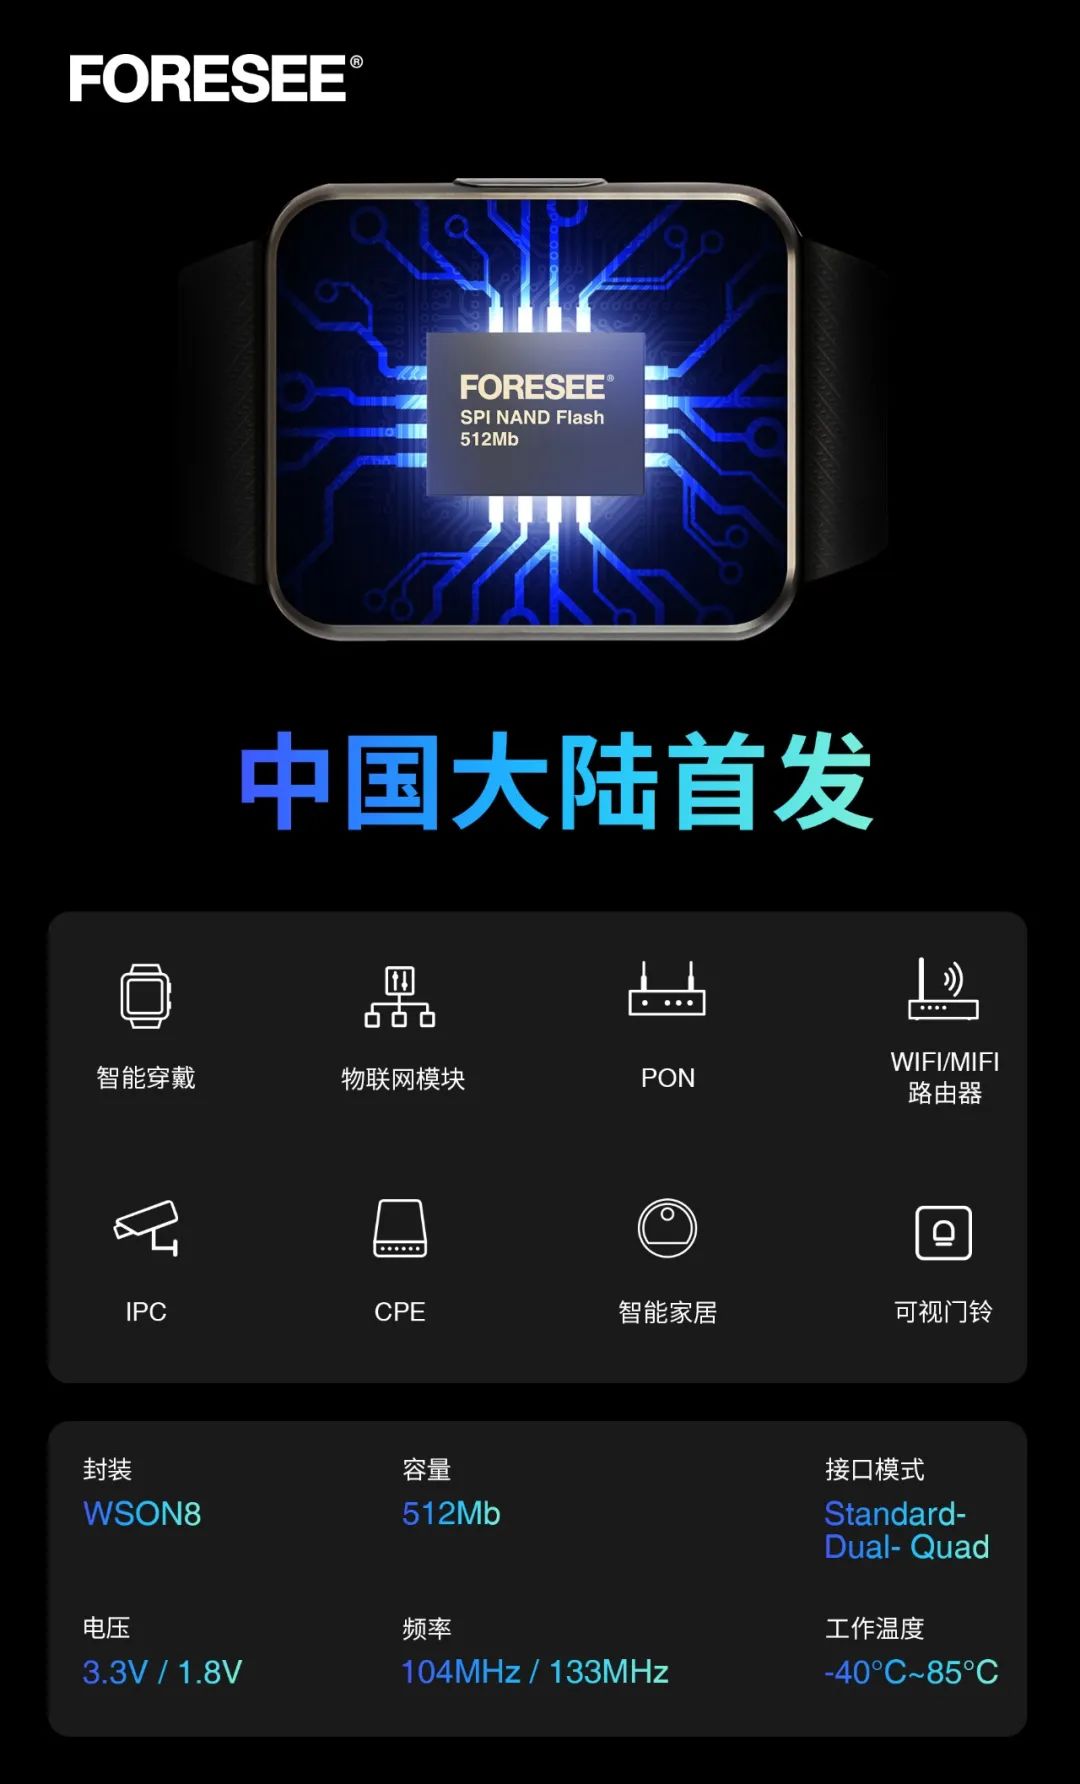 FORESEE中国大陆首发512Mb SPI NAND Flash